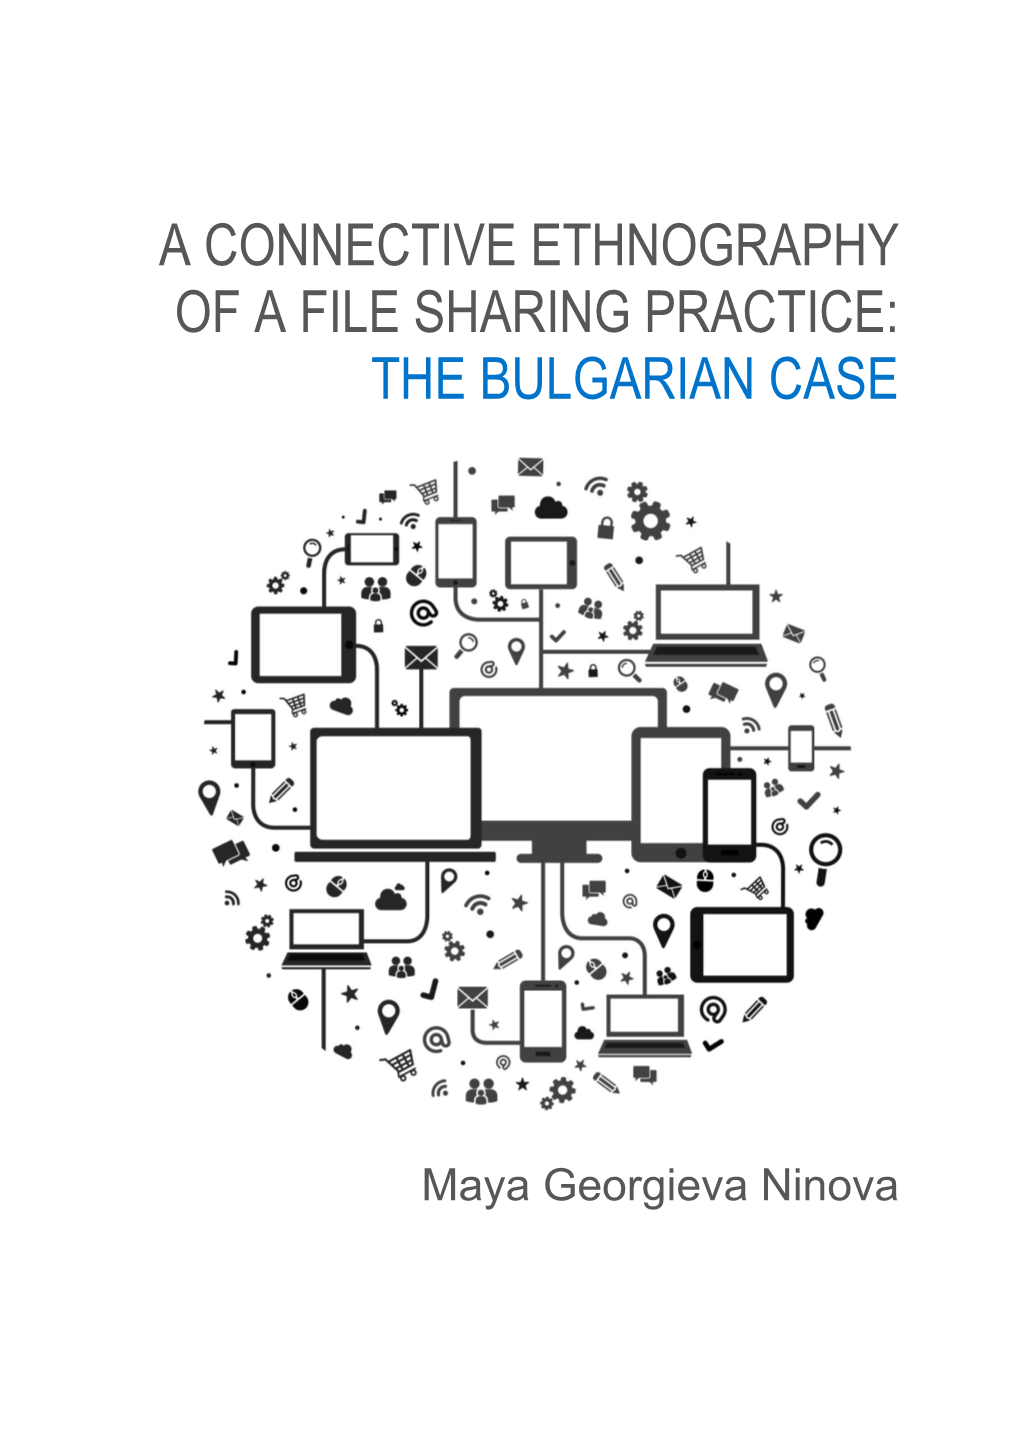 A Connective Ethnography of a File Sharing Practice: the Bulgarian Case